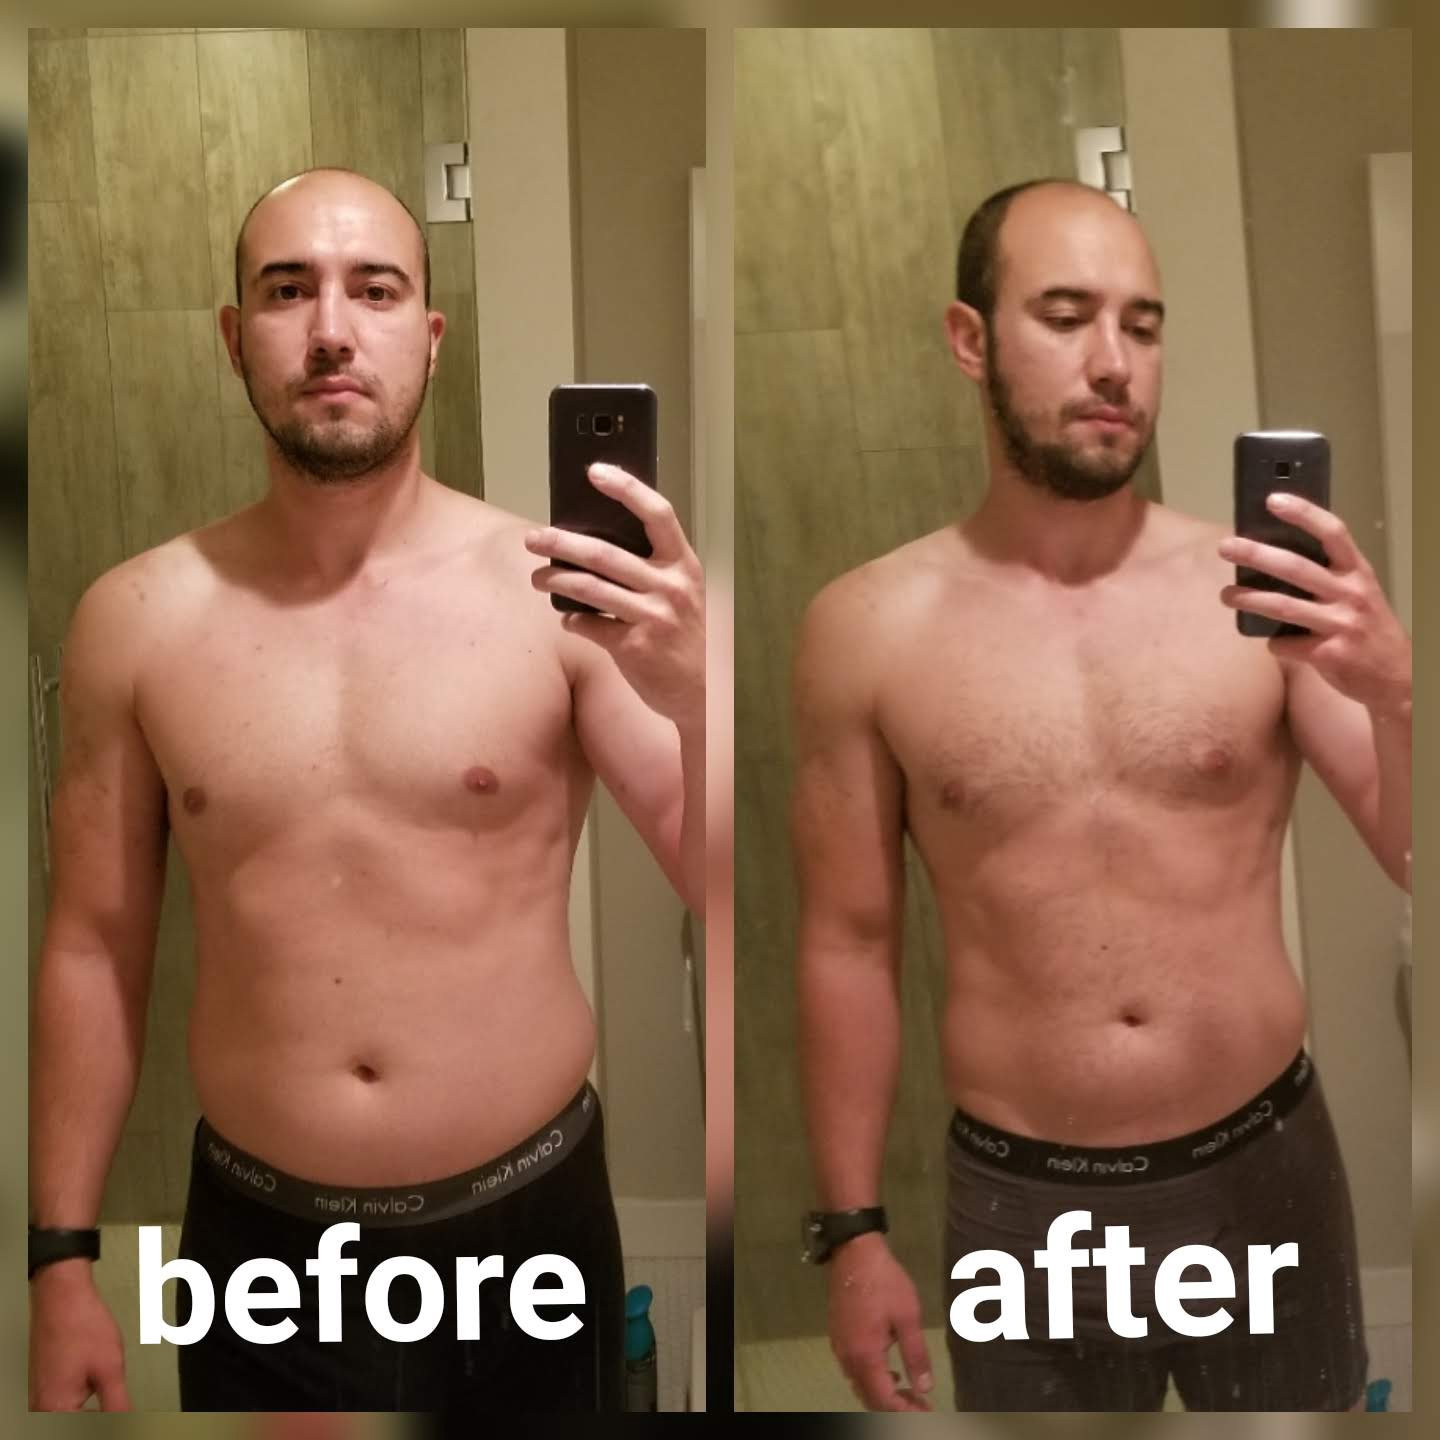 https://eatandcooking.com/wp-content/uploads/2020/12/keto-diet-results-male-fresh-i-tried-the-ketogenic-diet-for-4-weeks-heres-what-of-keto-diet-results-male.jpg